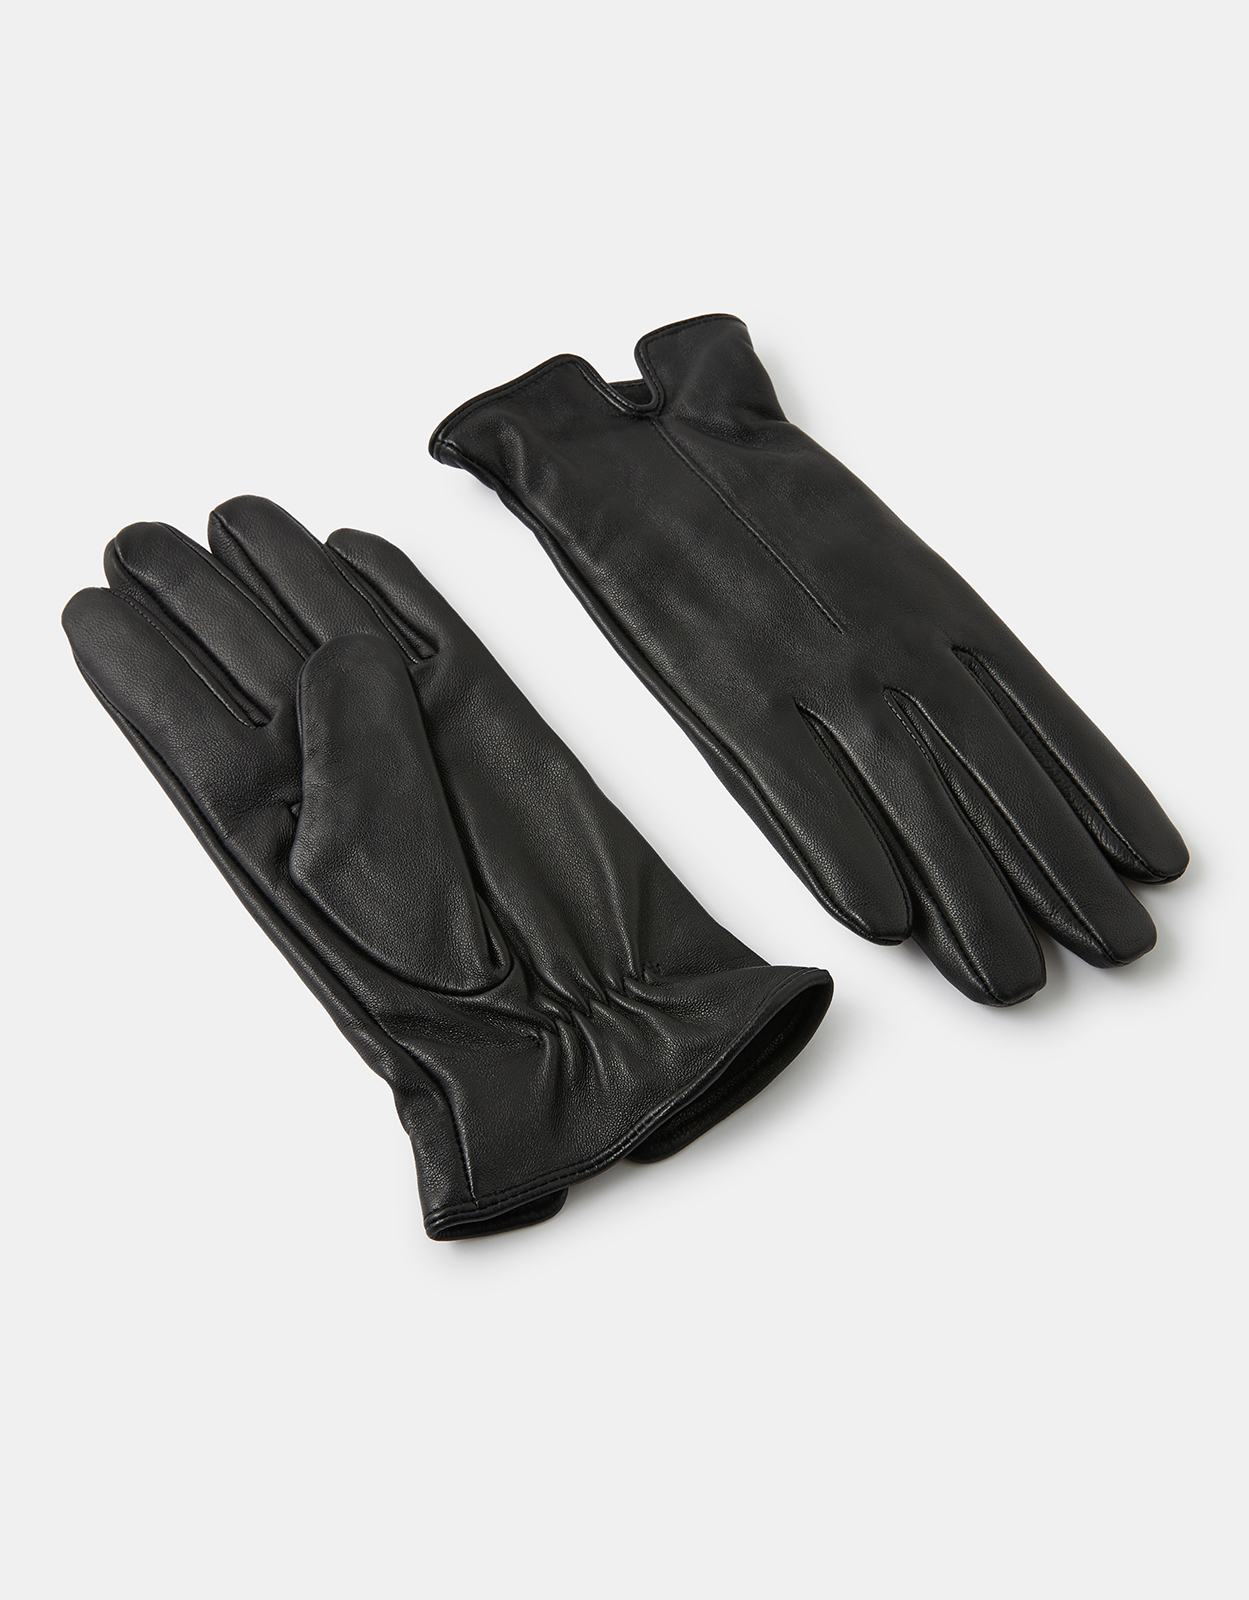 Accessorize Women's Luxe Leather Gloves Black, Size: M / L